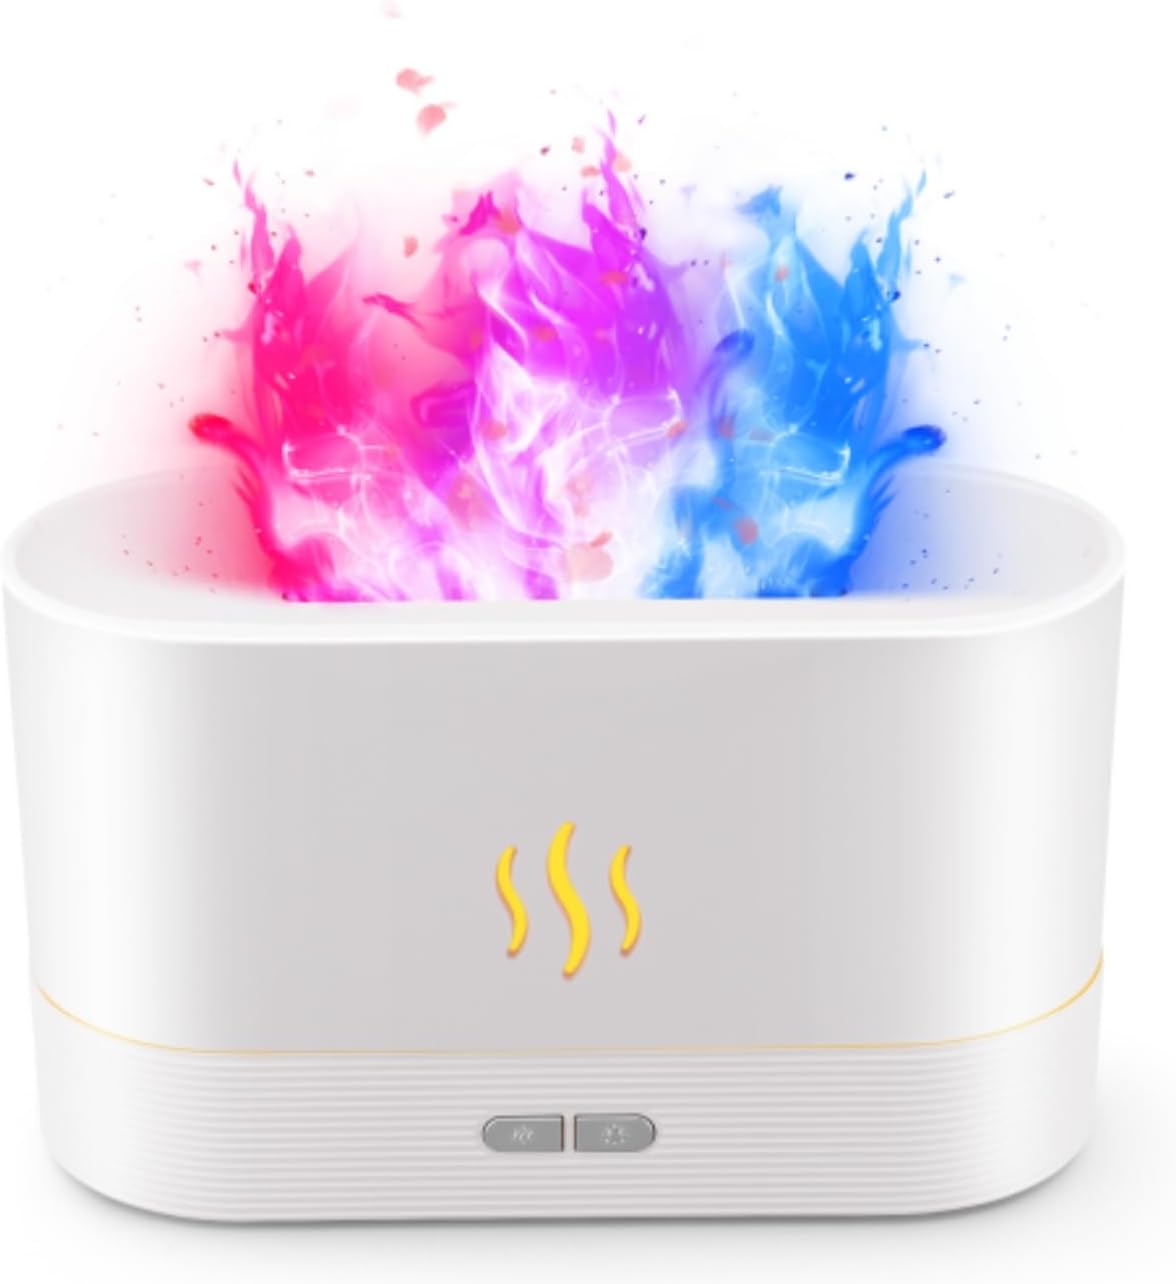 7-Color Flame & Water Diffuser: Touchable Flame with Aromatherapy